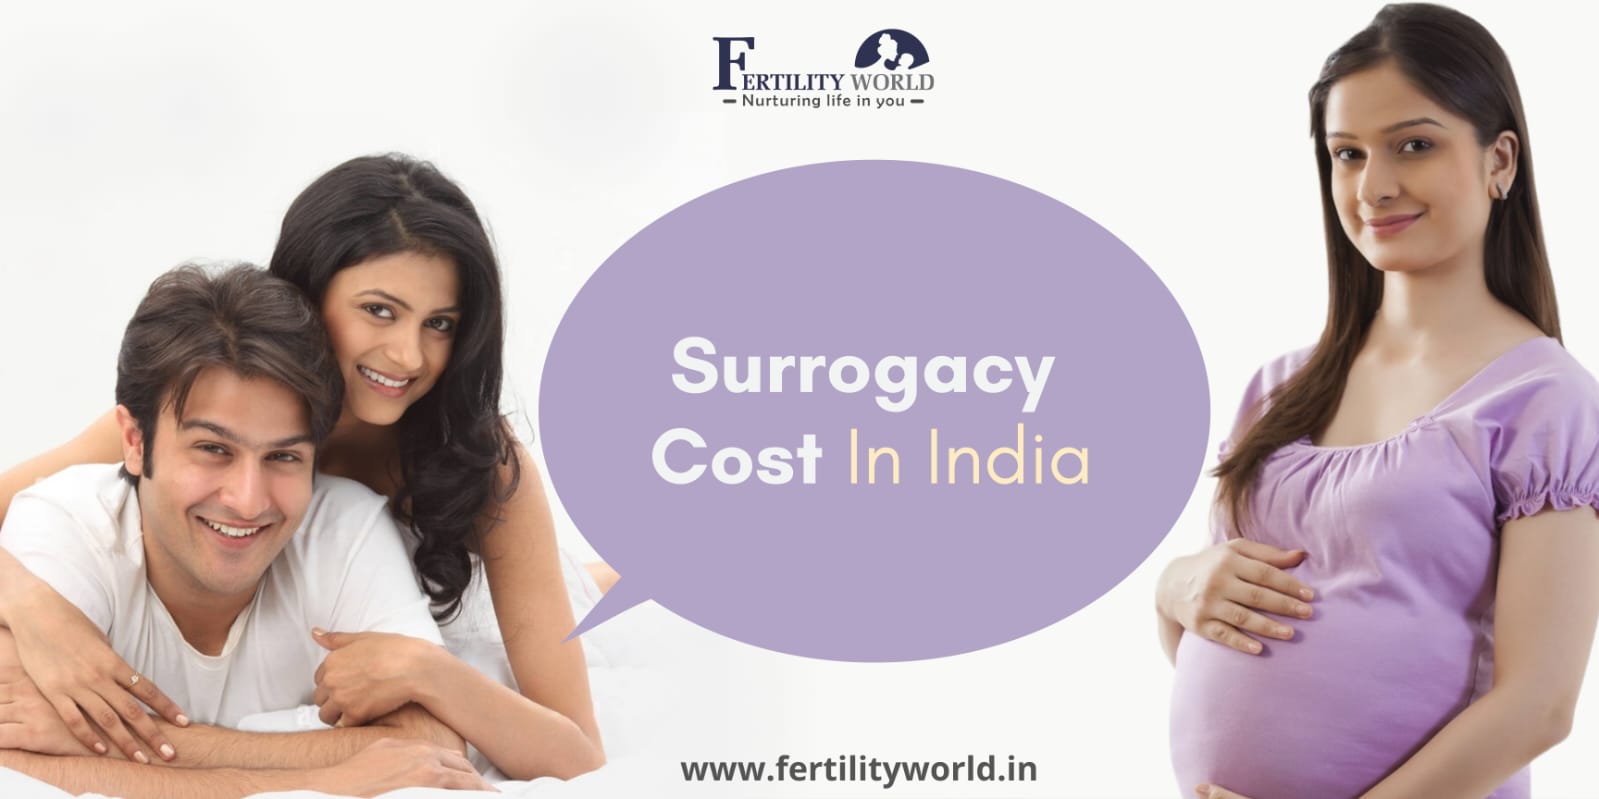 What is the surrogacy cost in India?